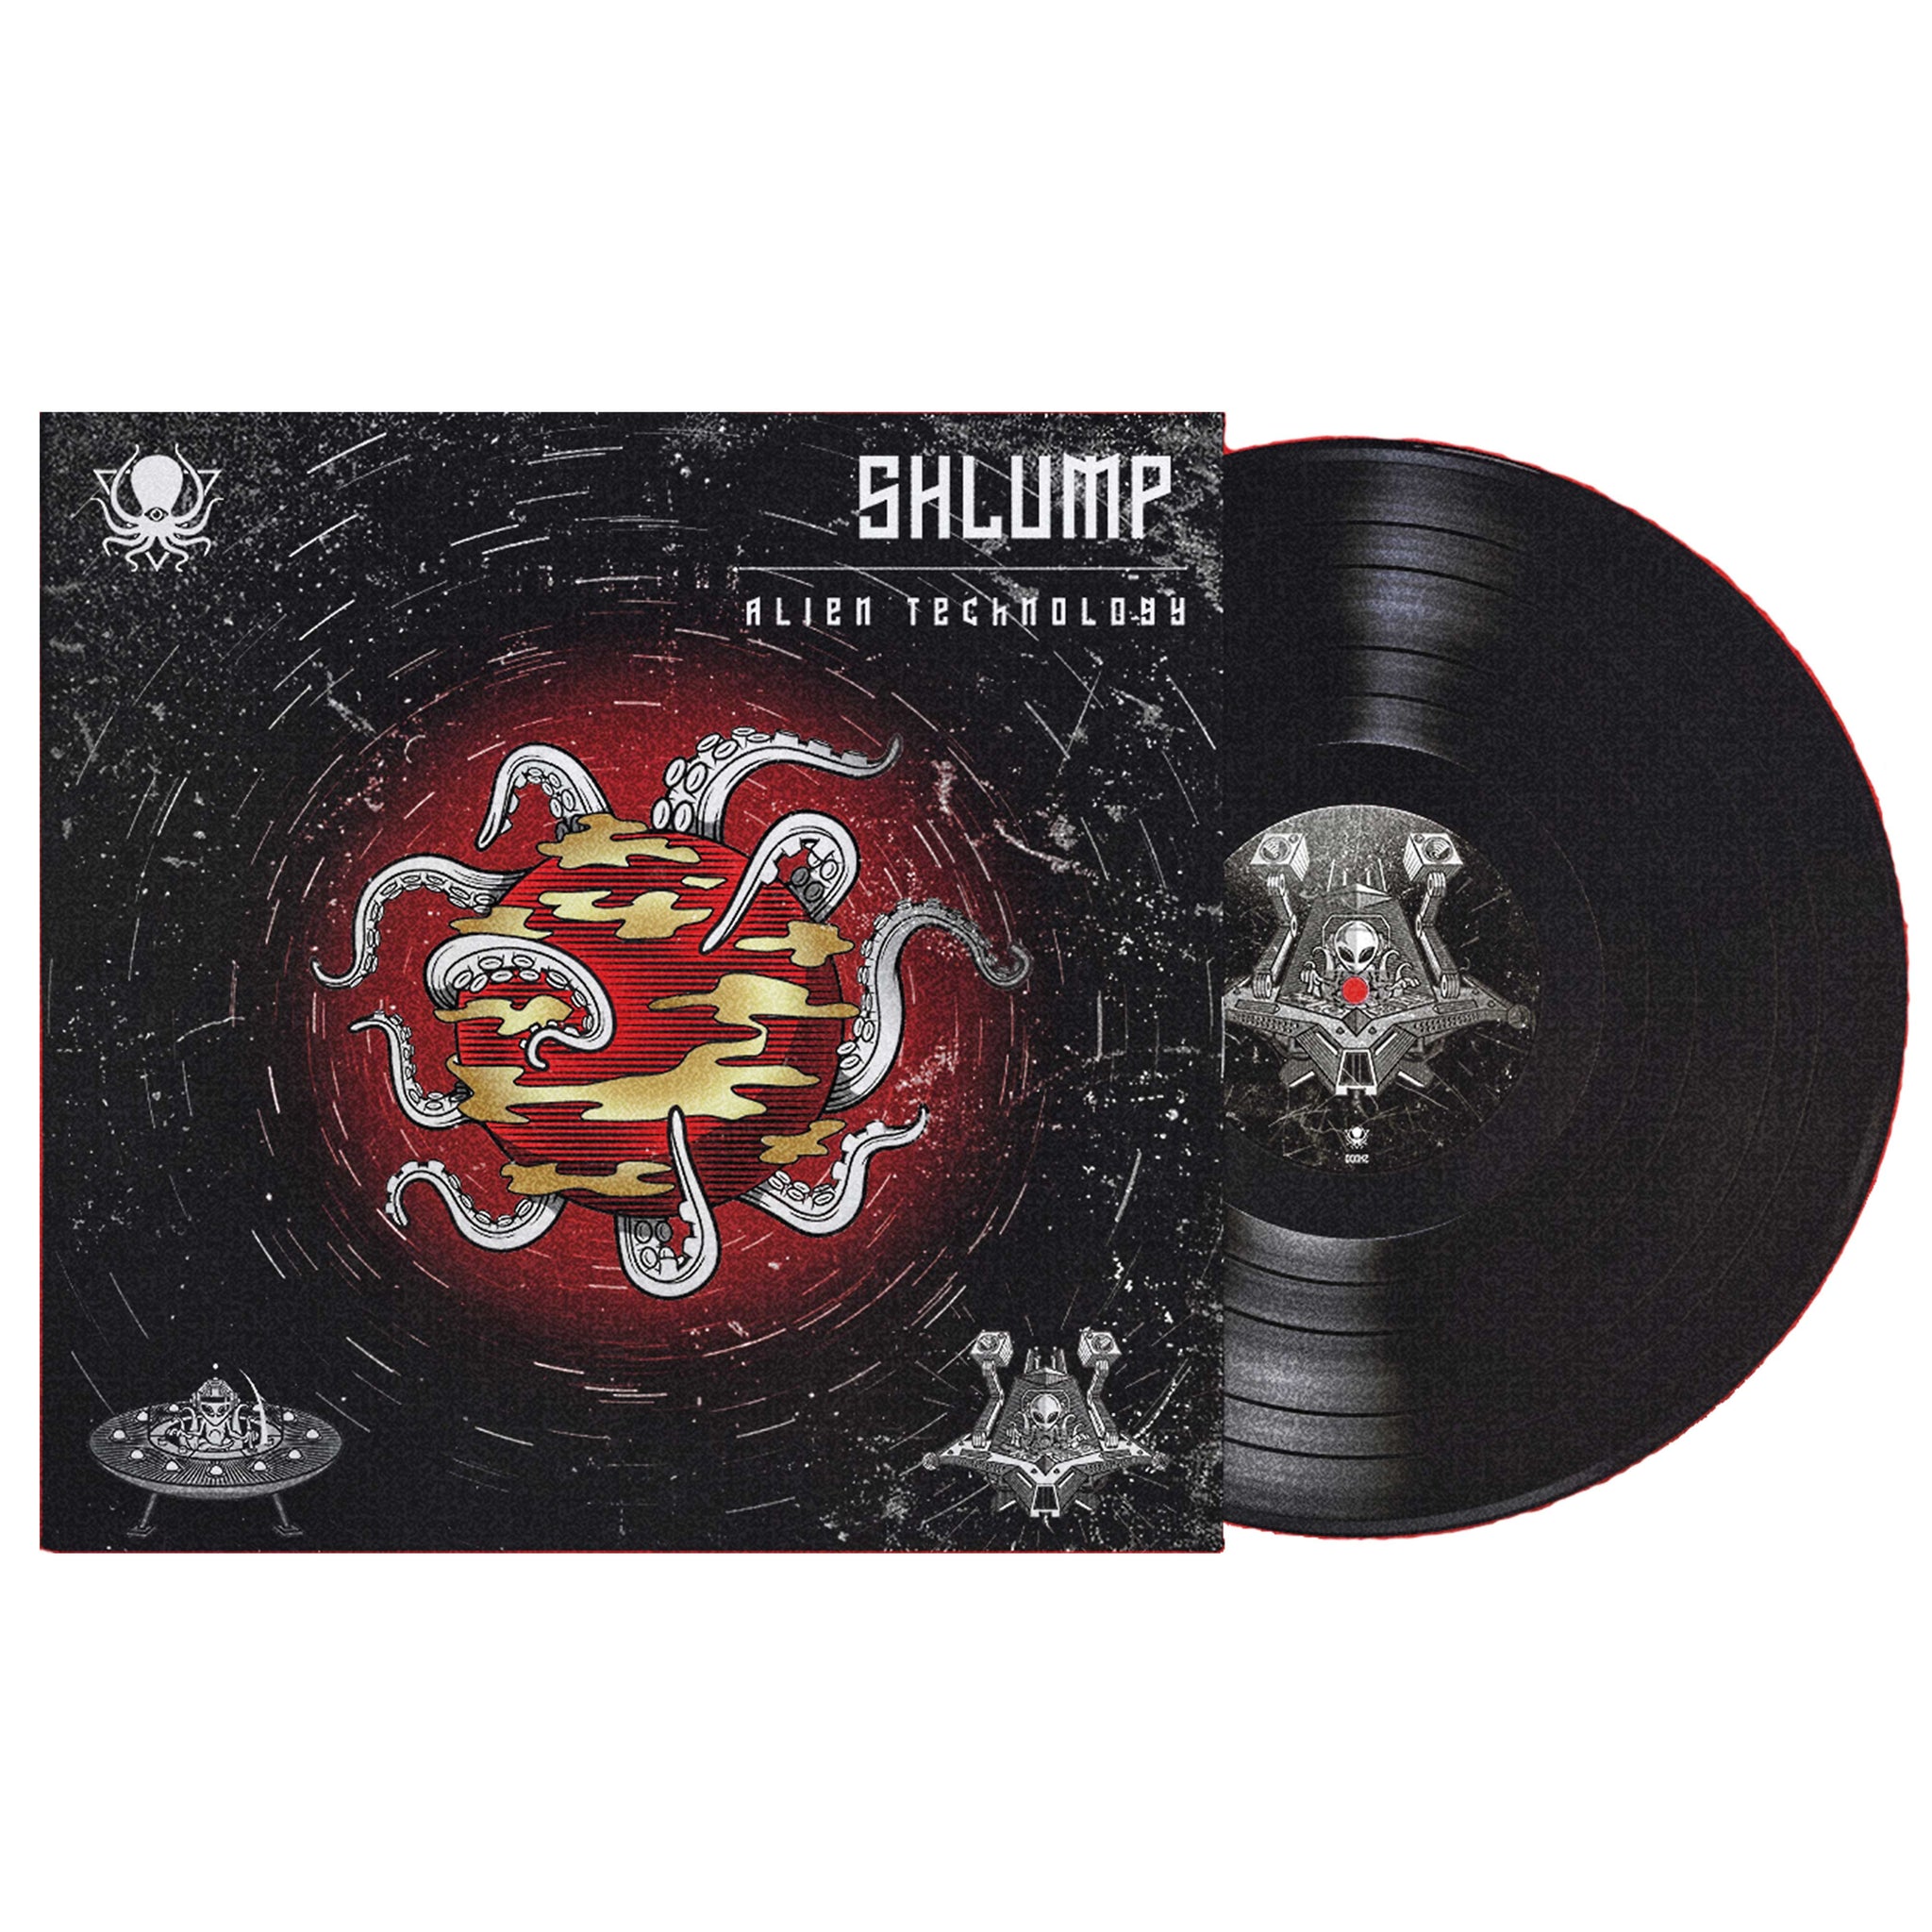 Shlump - Alien Technology (Limited 12" Vinyl / Including Posters & Stickers)